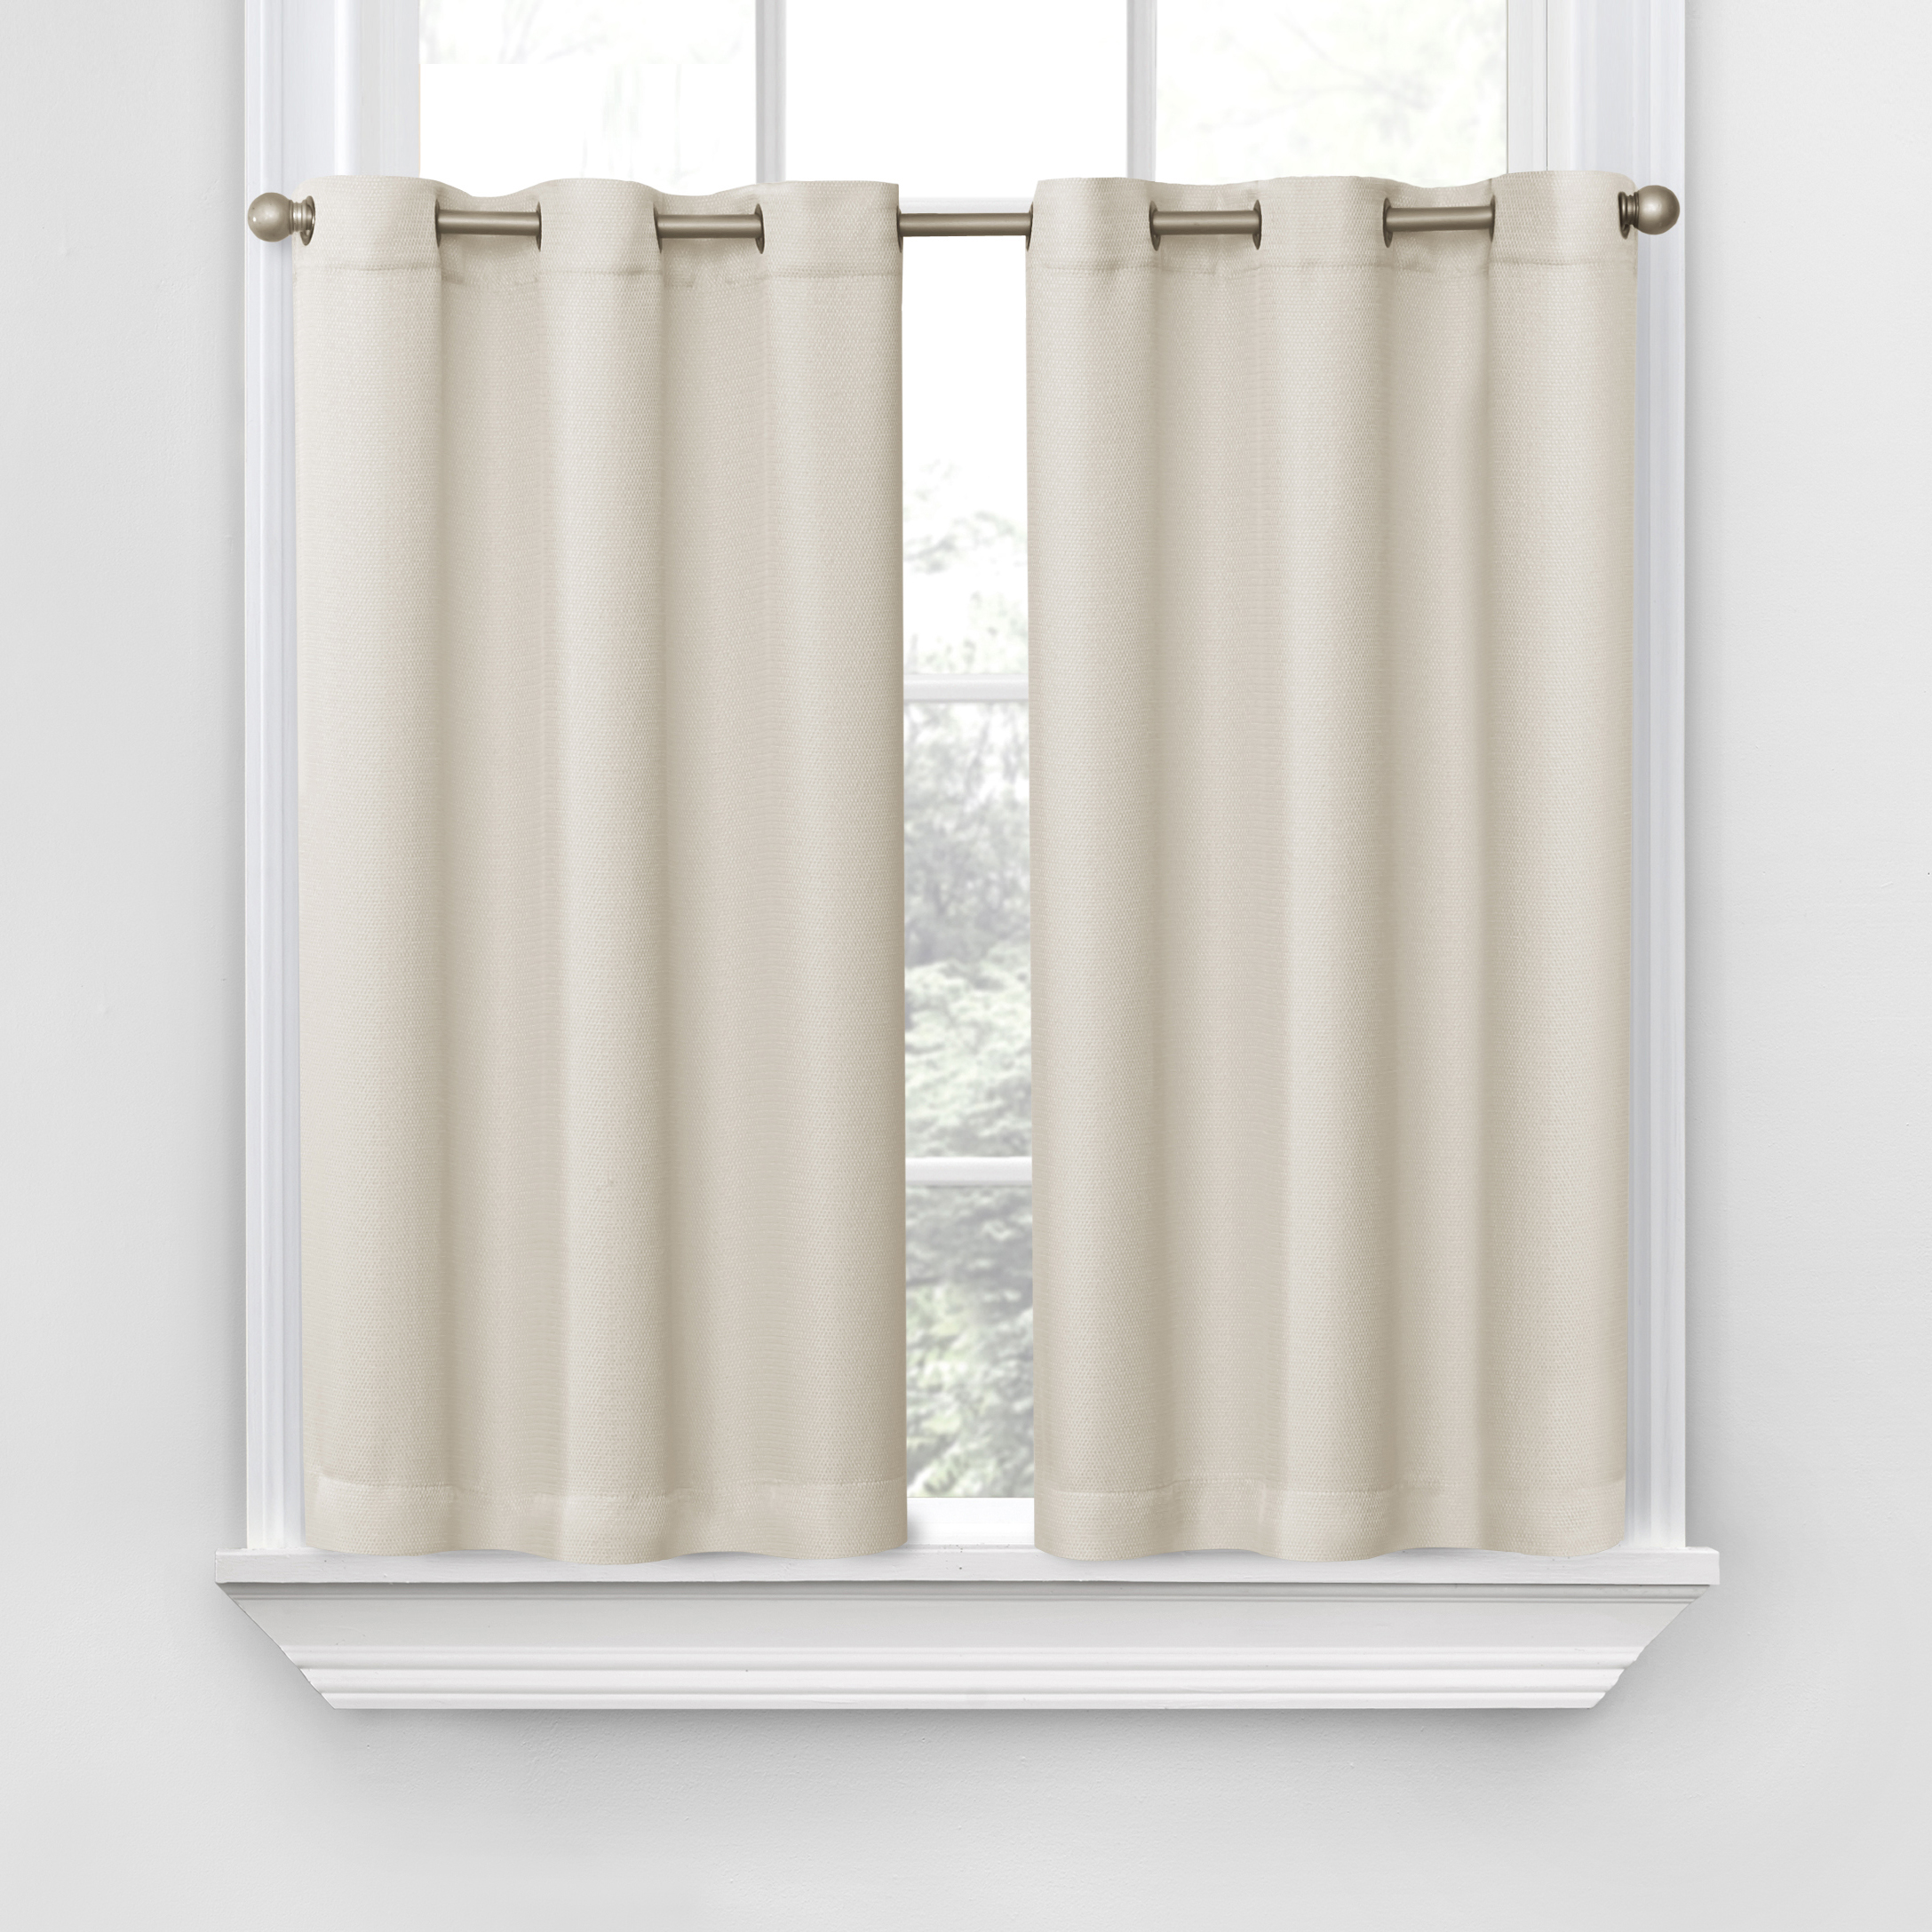 Tranquility Tier Curtain